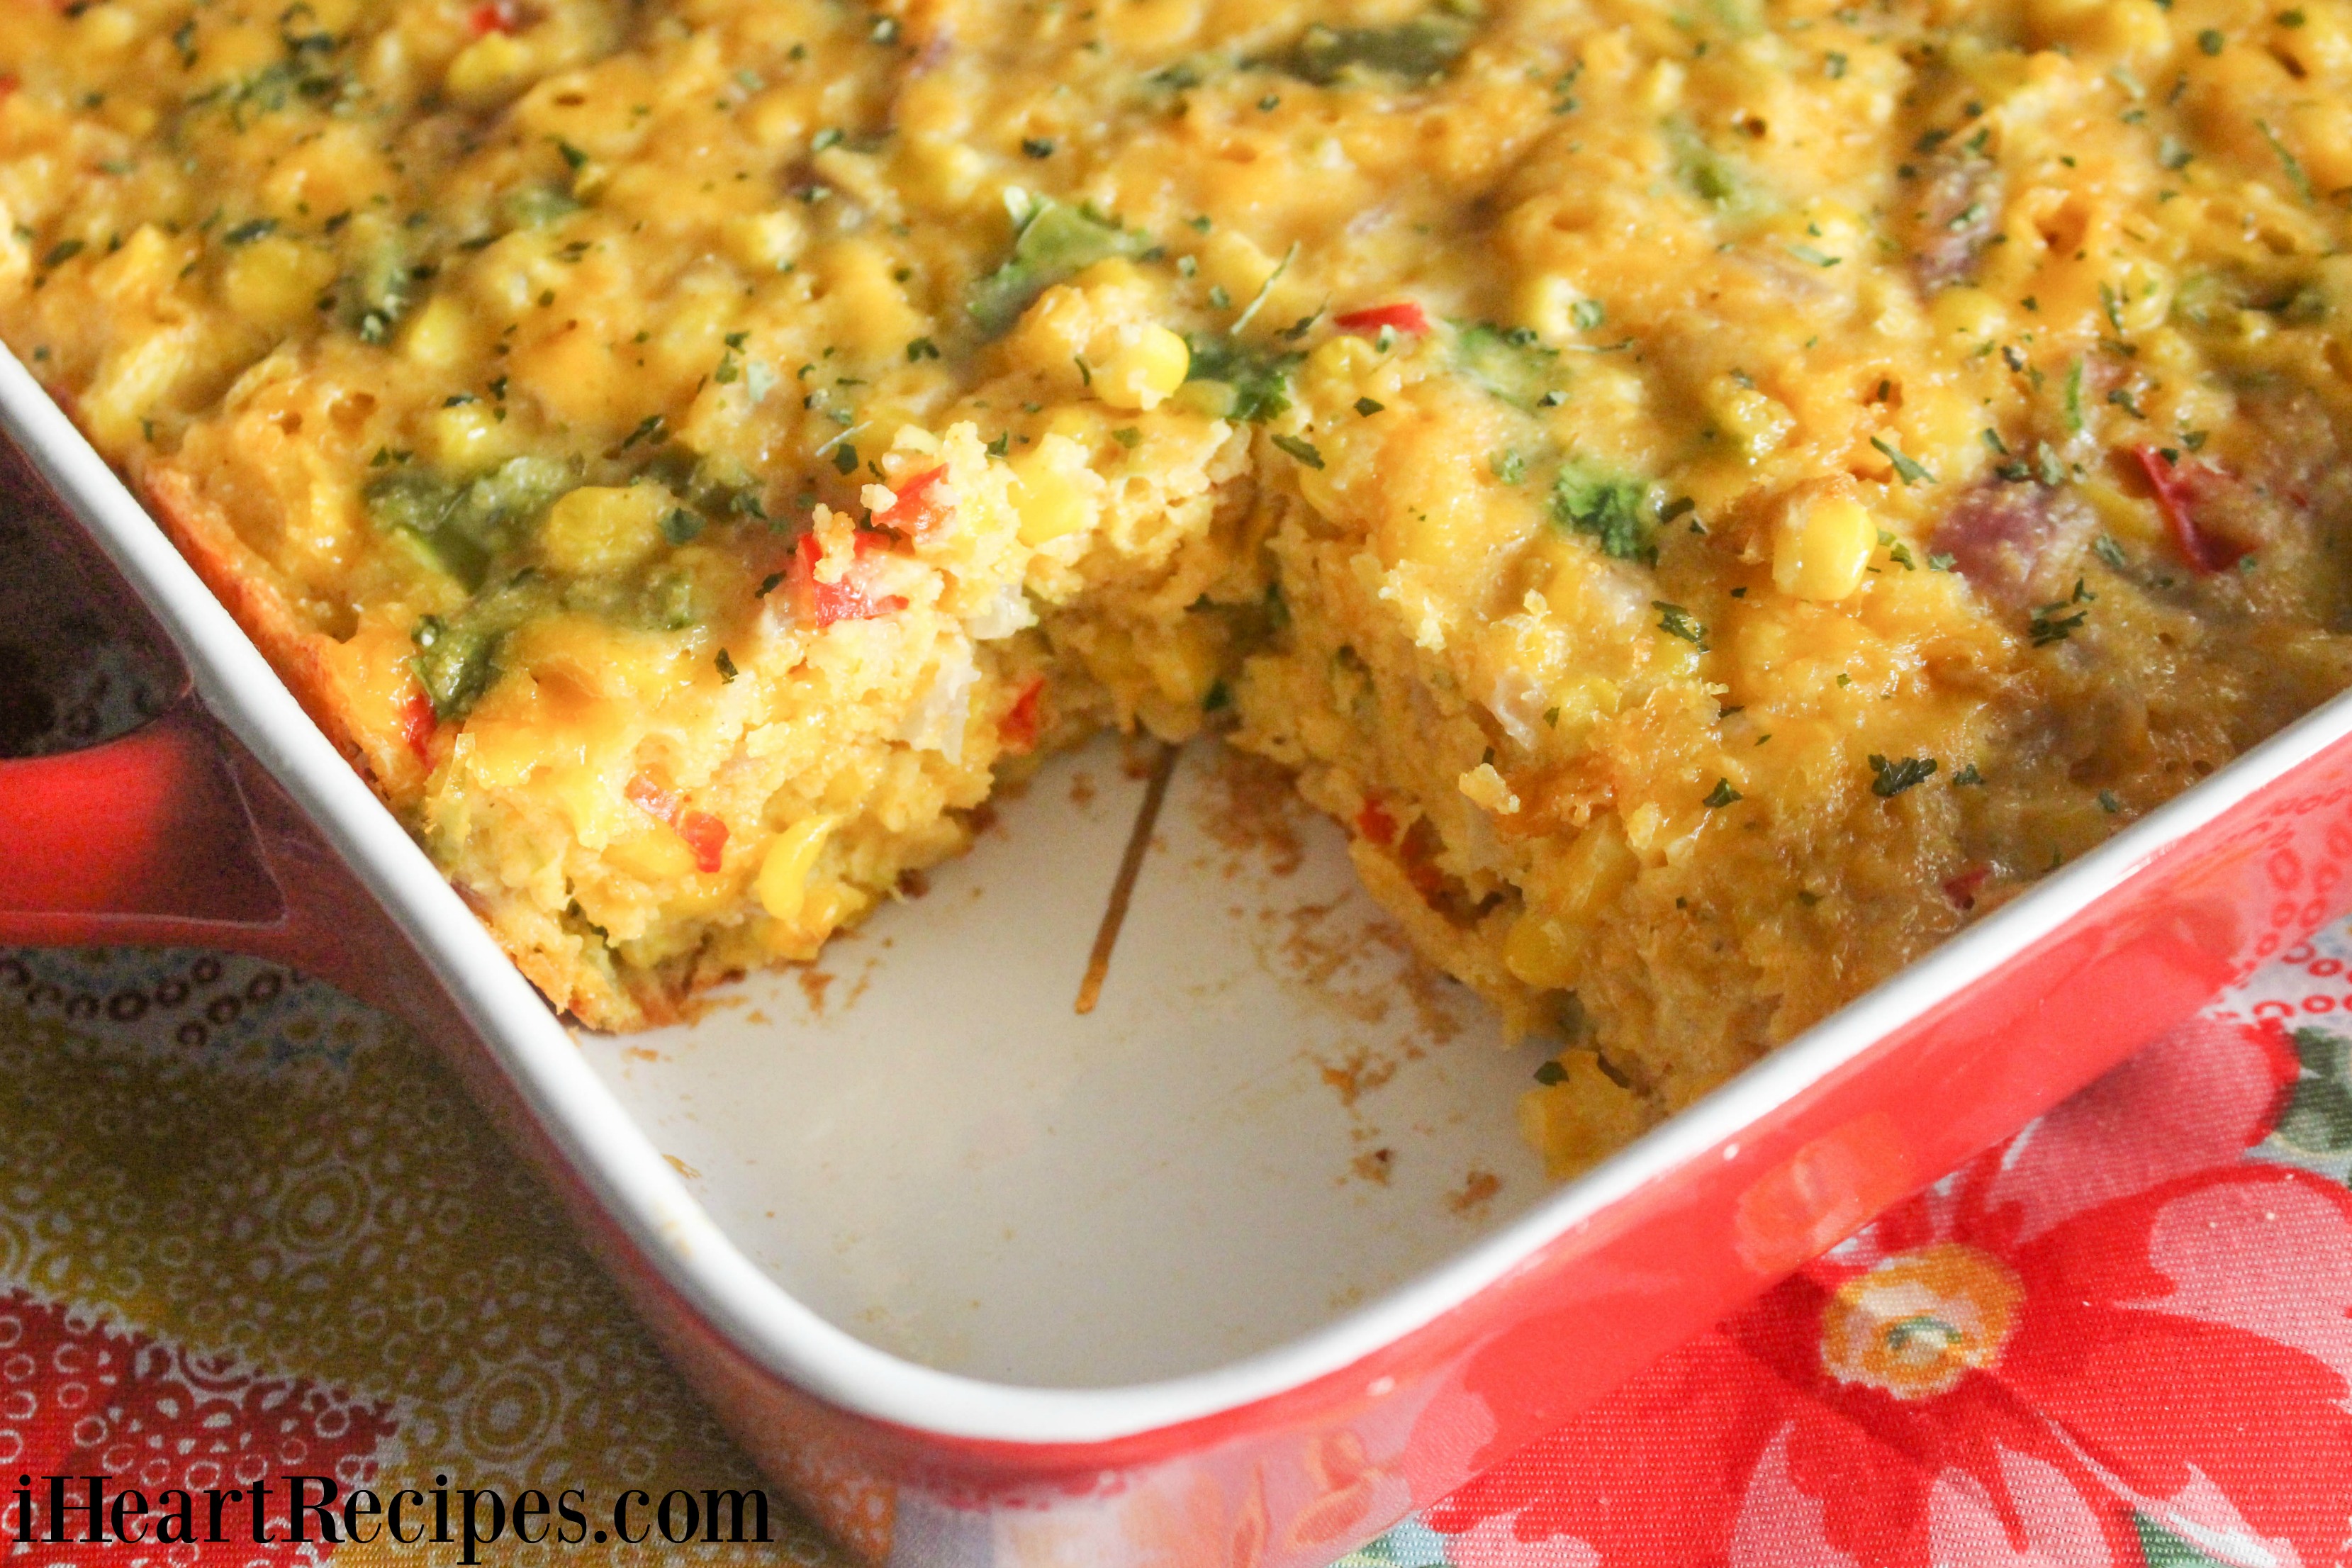 Creamy tex mex corn casserole served right out of the red baking dish. This casserole is packed with flavor!